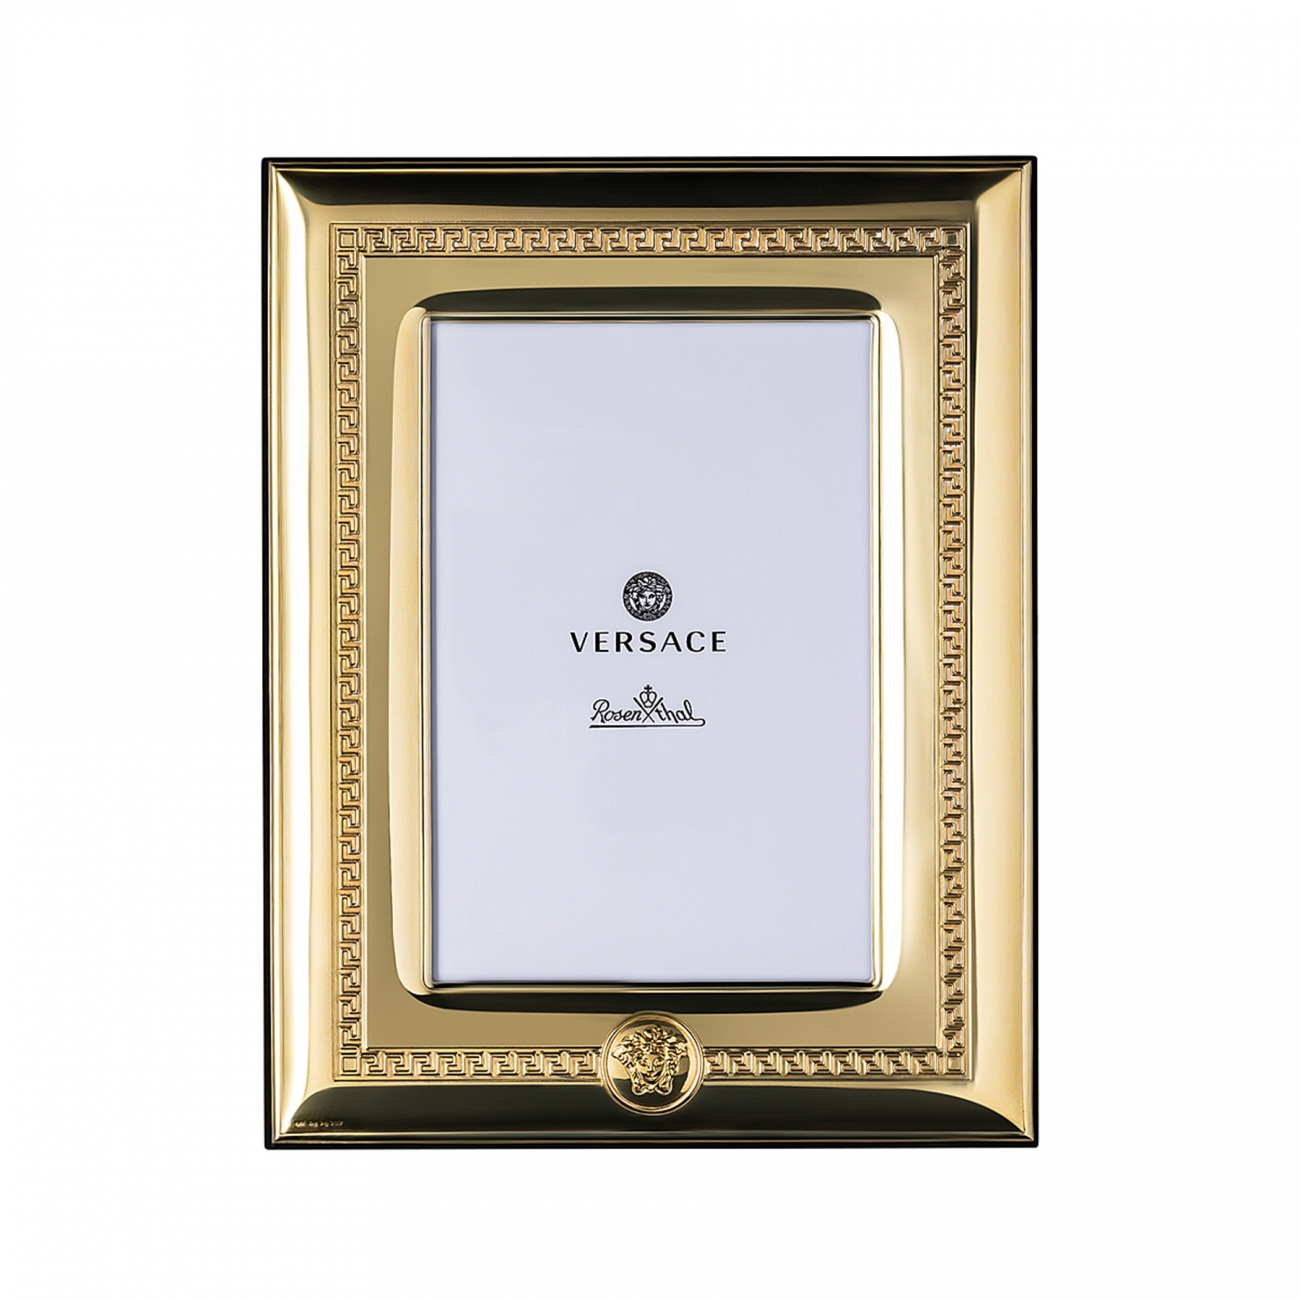 Rosenthal Versace Frames VHF6 Gold Picture frame